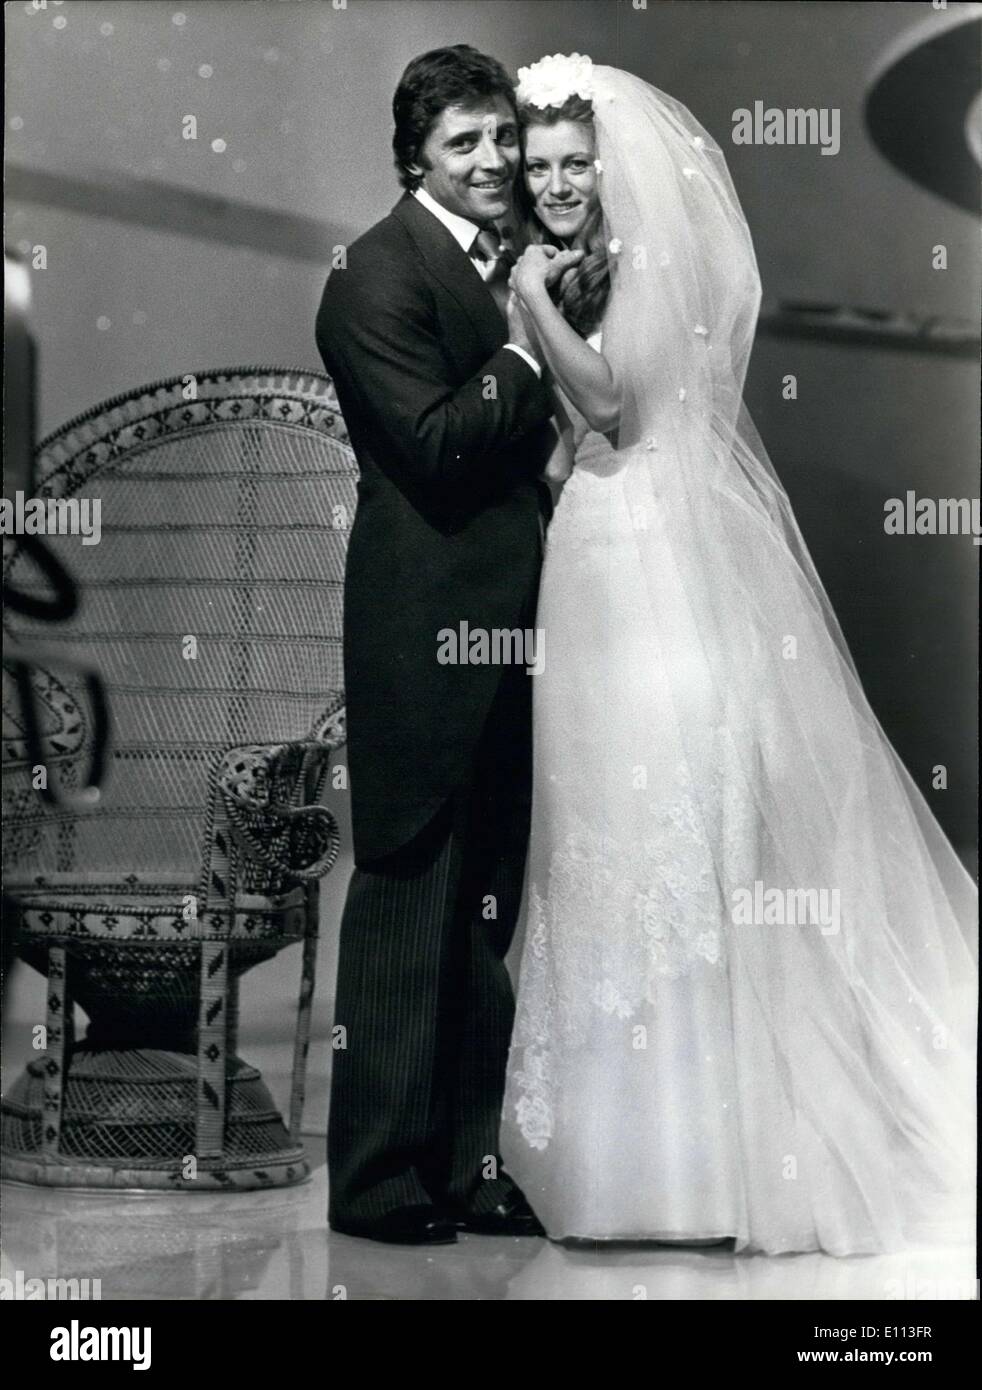 Sep. 26, 1975 - Have Sheila and Sacha Distel abandoned their respective partners to marry one another? No worries! The two singers participated in this ceremony for Sacha Distel's upcoming television show that will be premiered Saturday. Stock Photo